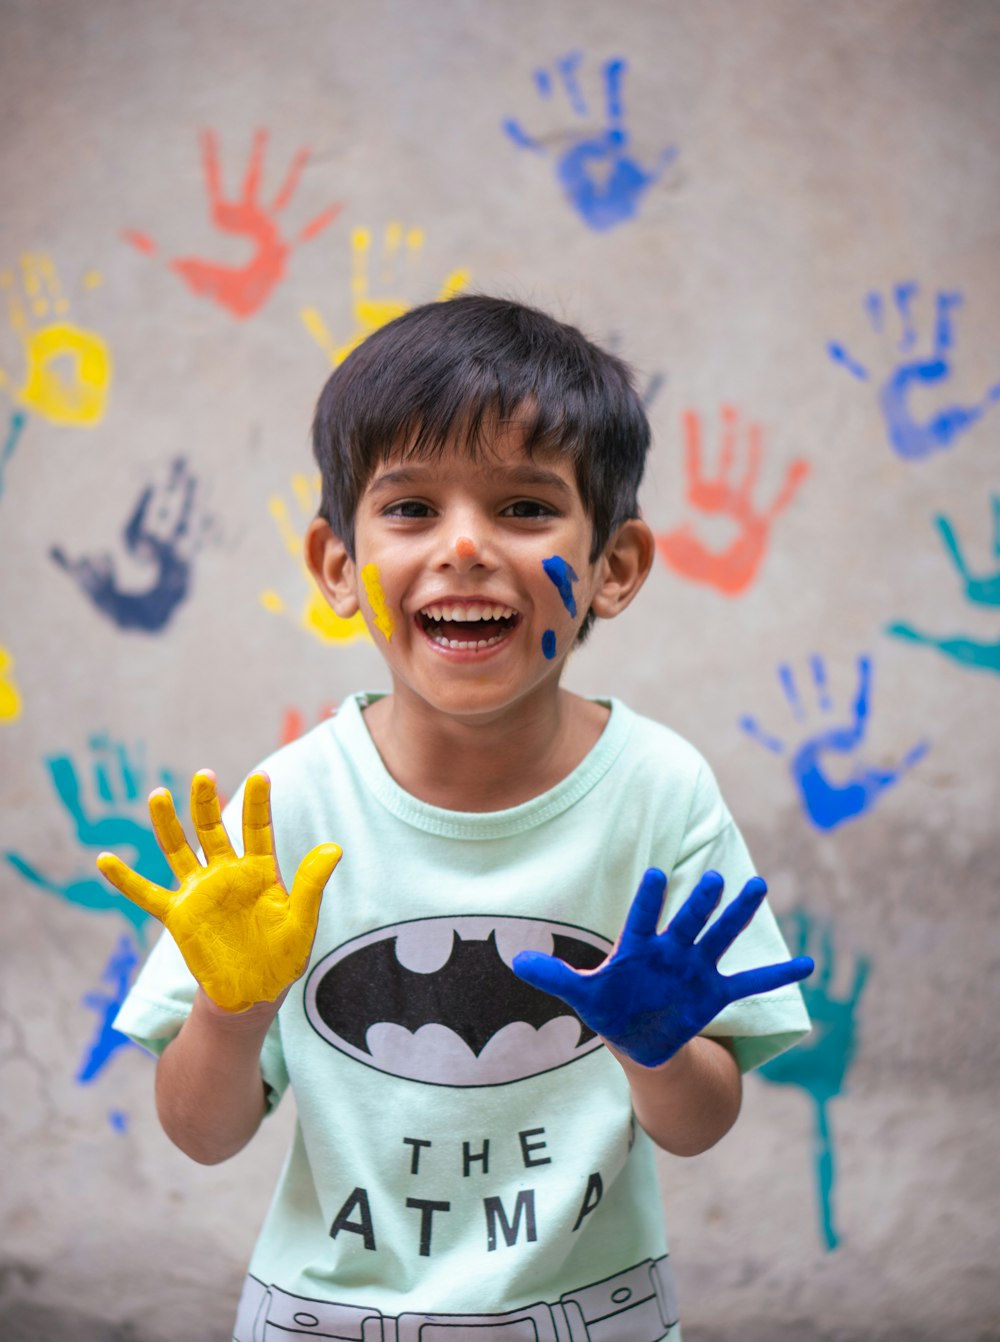 a young boy with his hands painted in blue and yellow